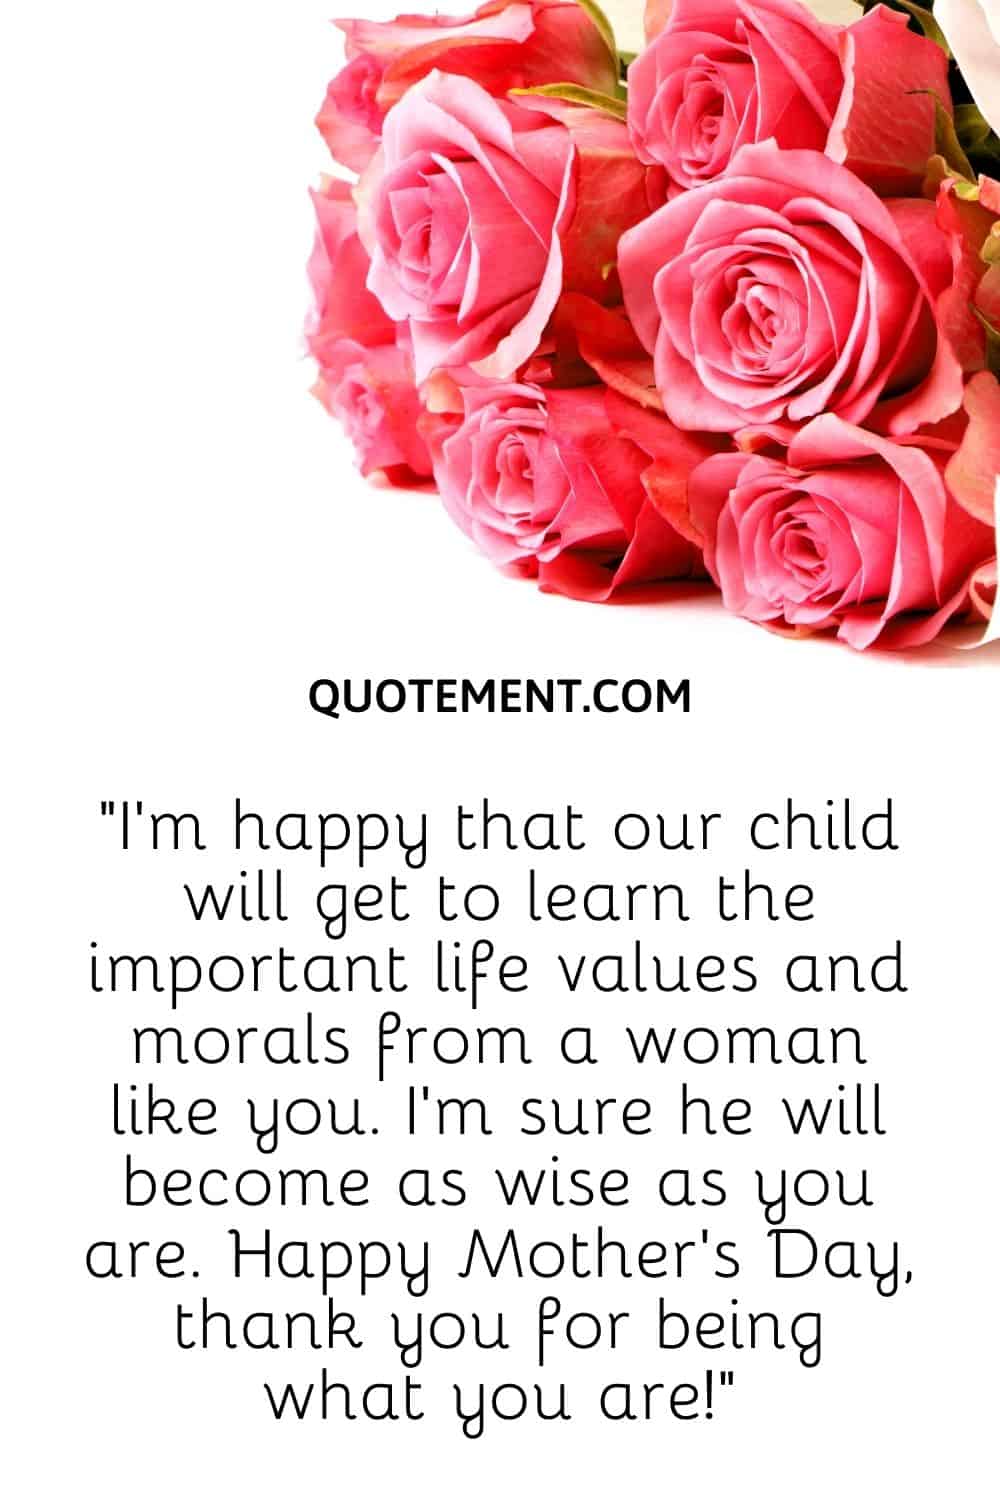 I’m happy that our child will get to learn the important life values and morals from a woman like you